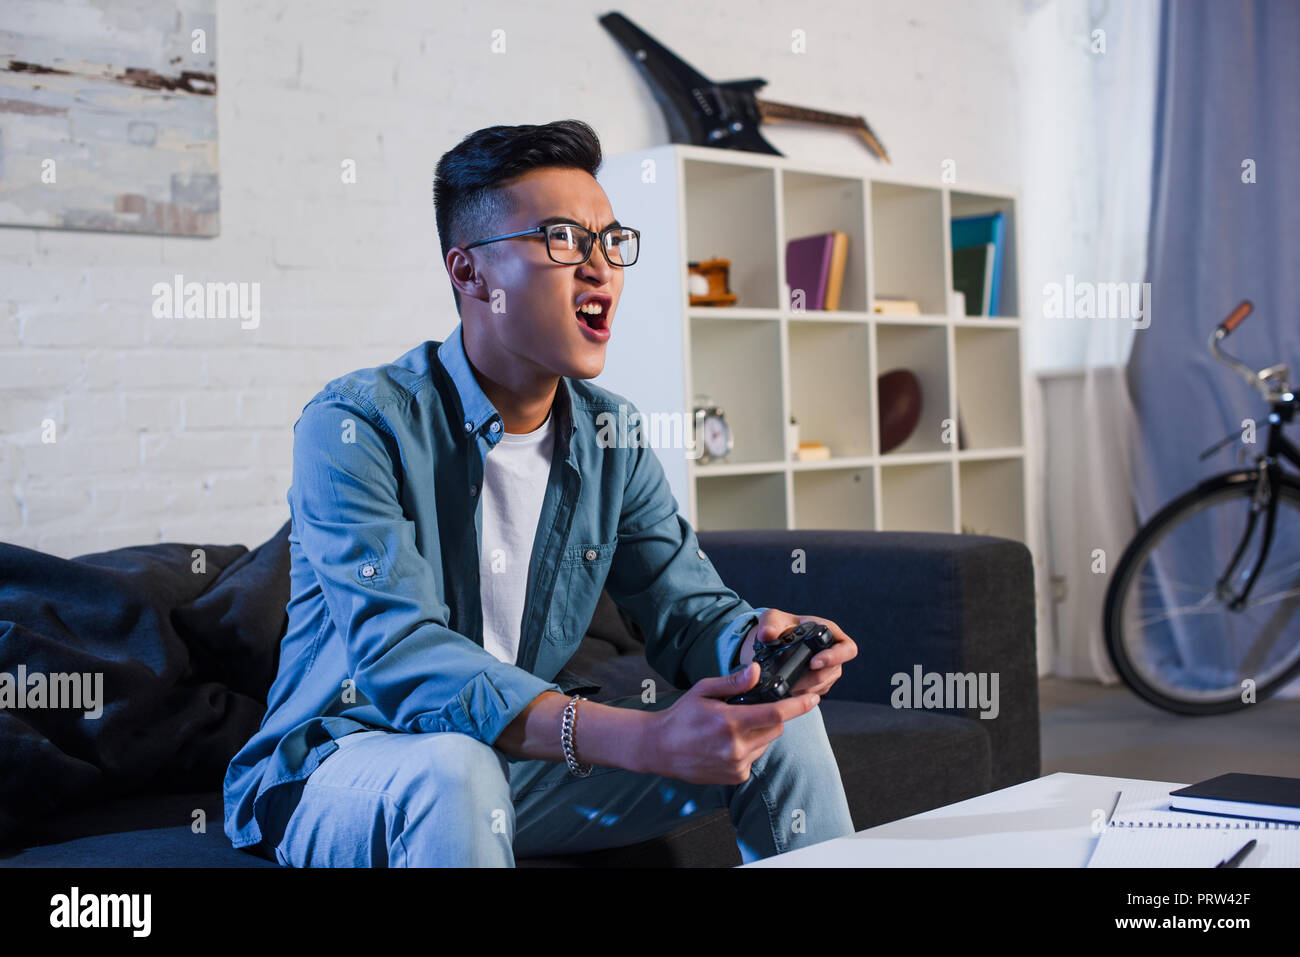 excited young asian man yelling and playing video game with joystick at home Stock Photo